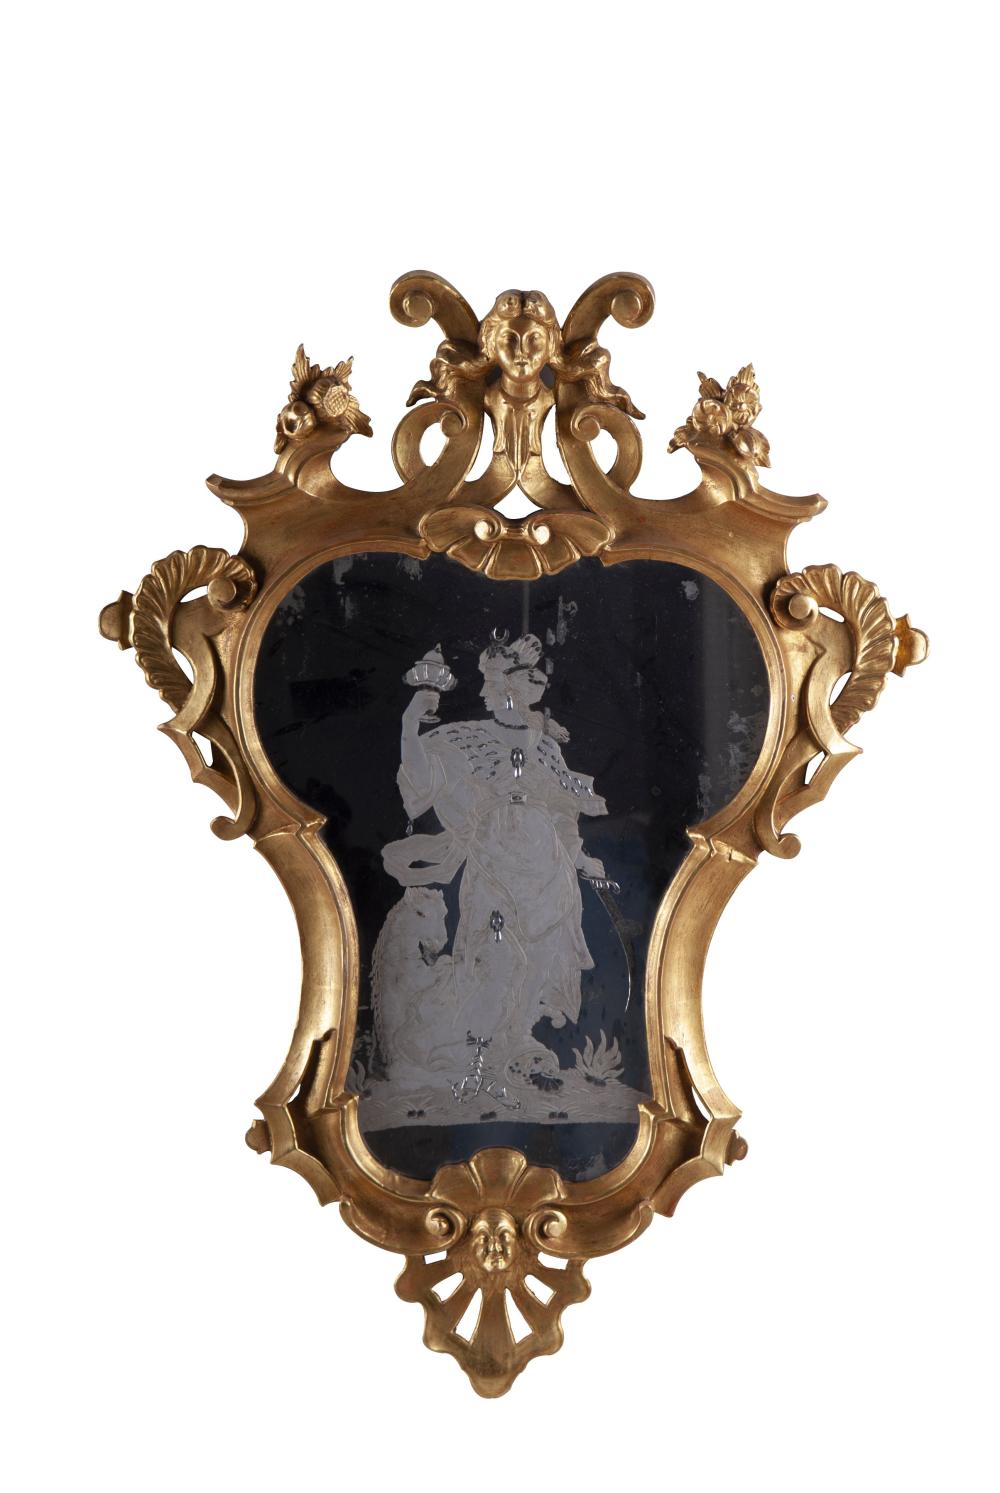 BAROQUE STYLE GILT & ETCHED MIRRORthe